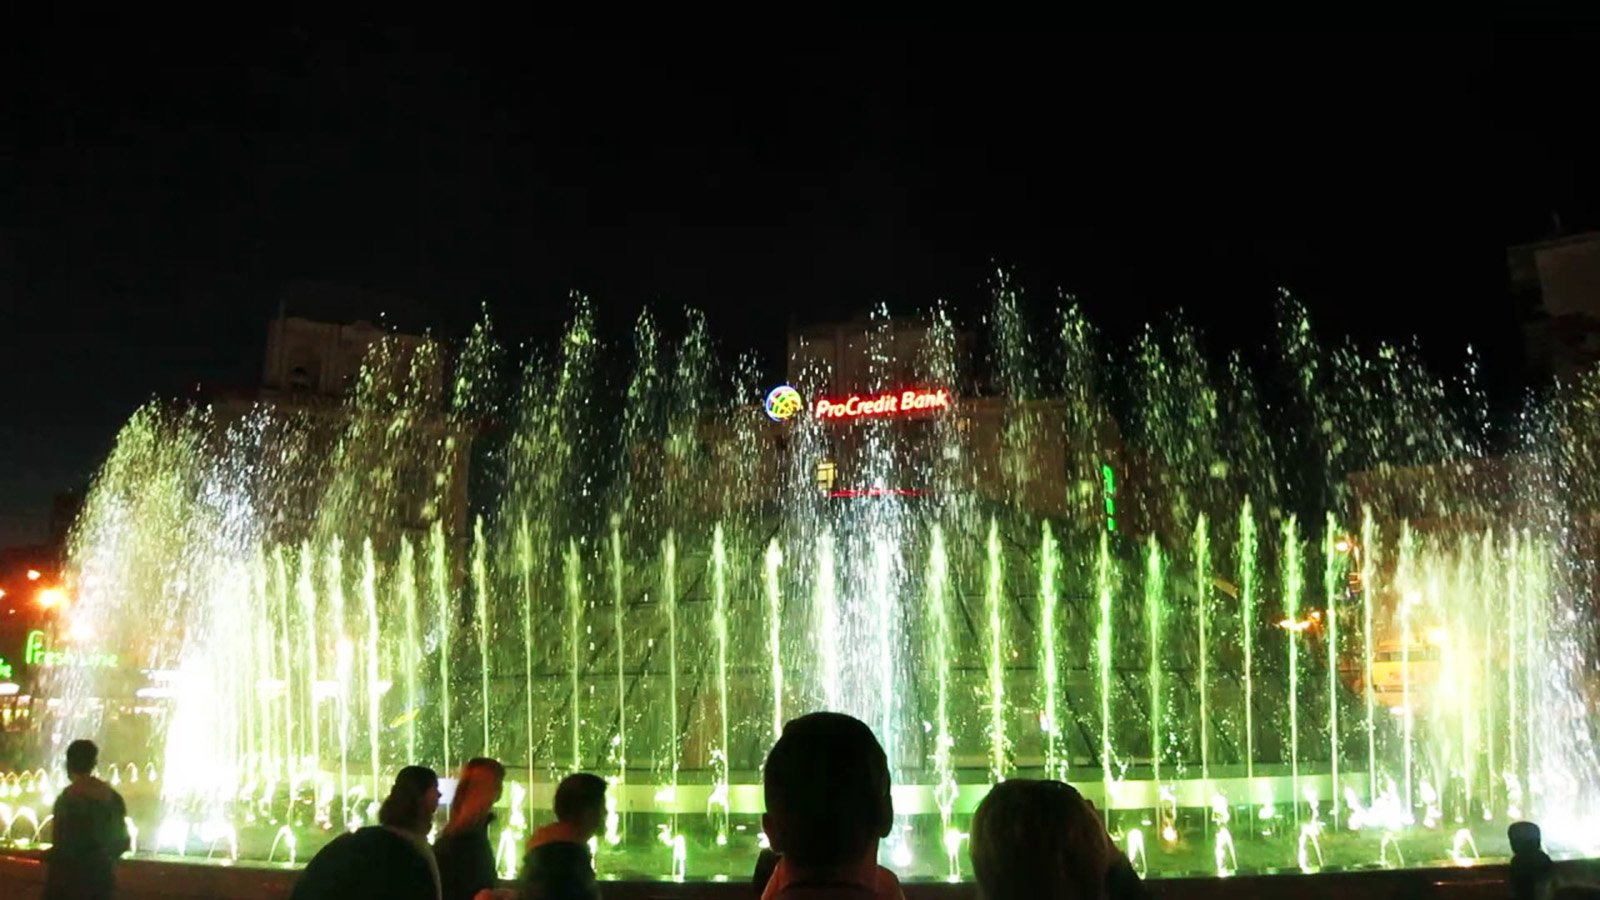 How to watch the dancing fountains in Kiev